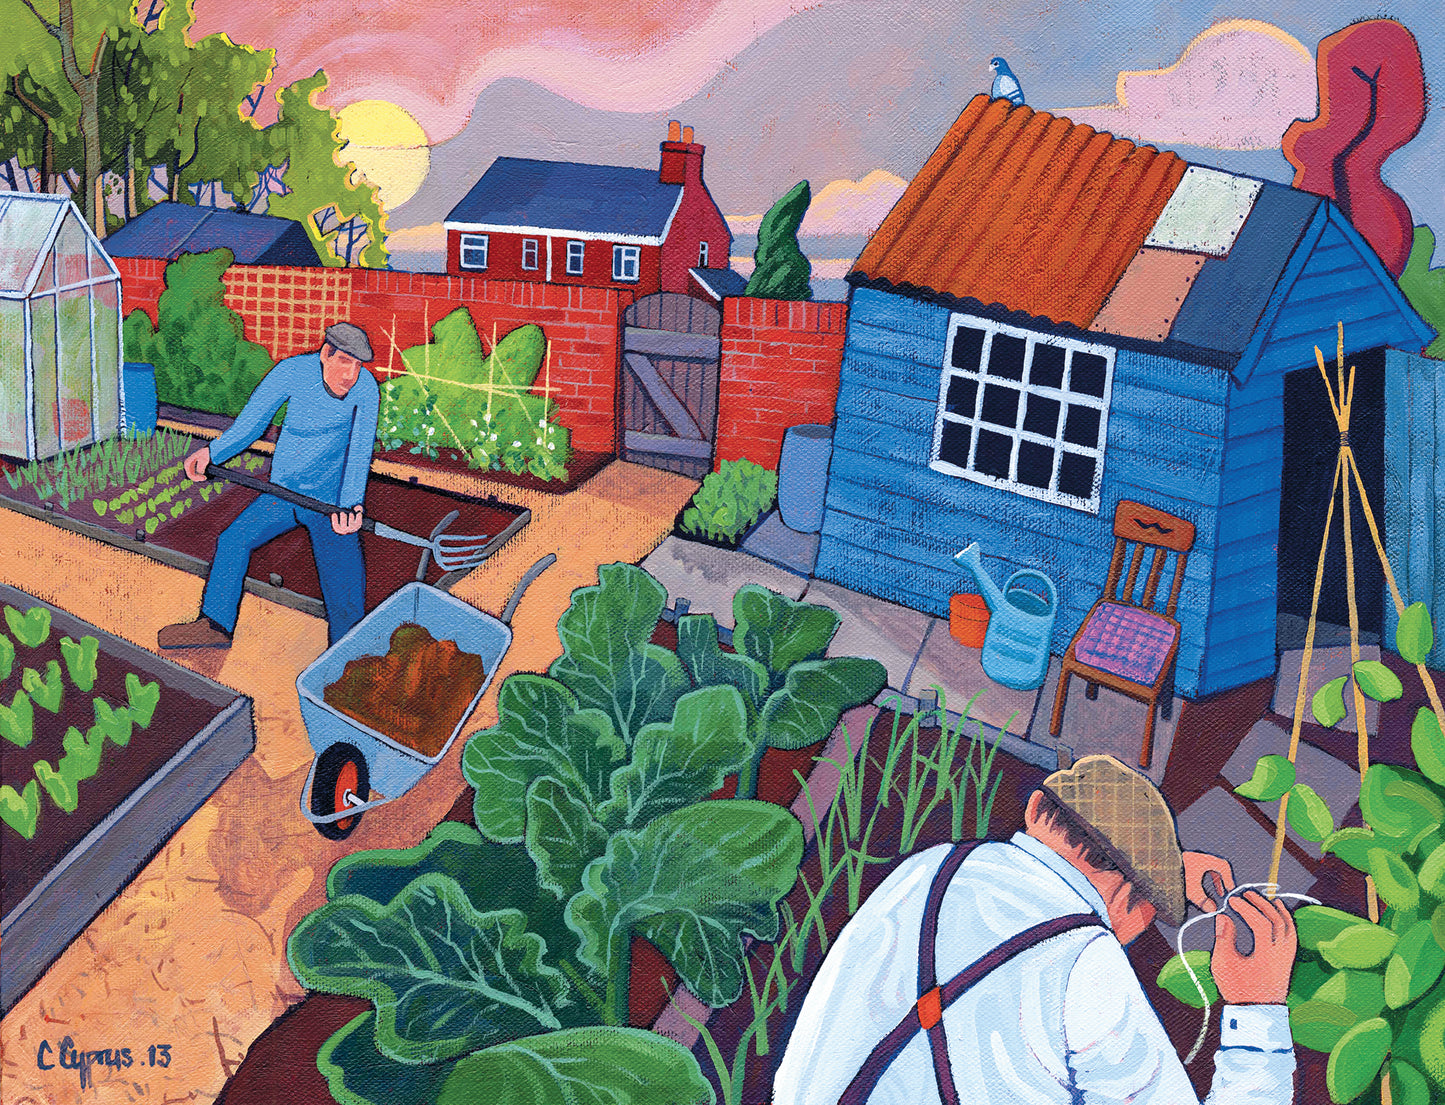 'Early Birds' Oil painting by famous Northern Artist Chris Cyprus. Features 2 old boys working the land on an allotment overlooked by a pigeon friend sitting on top of a shed. © Chris Cyprus 2013 archive